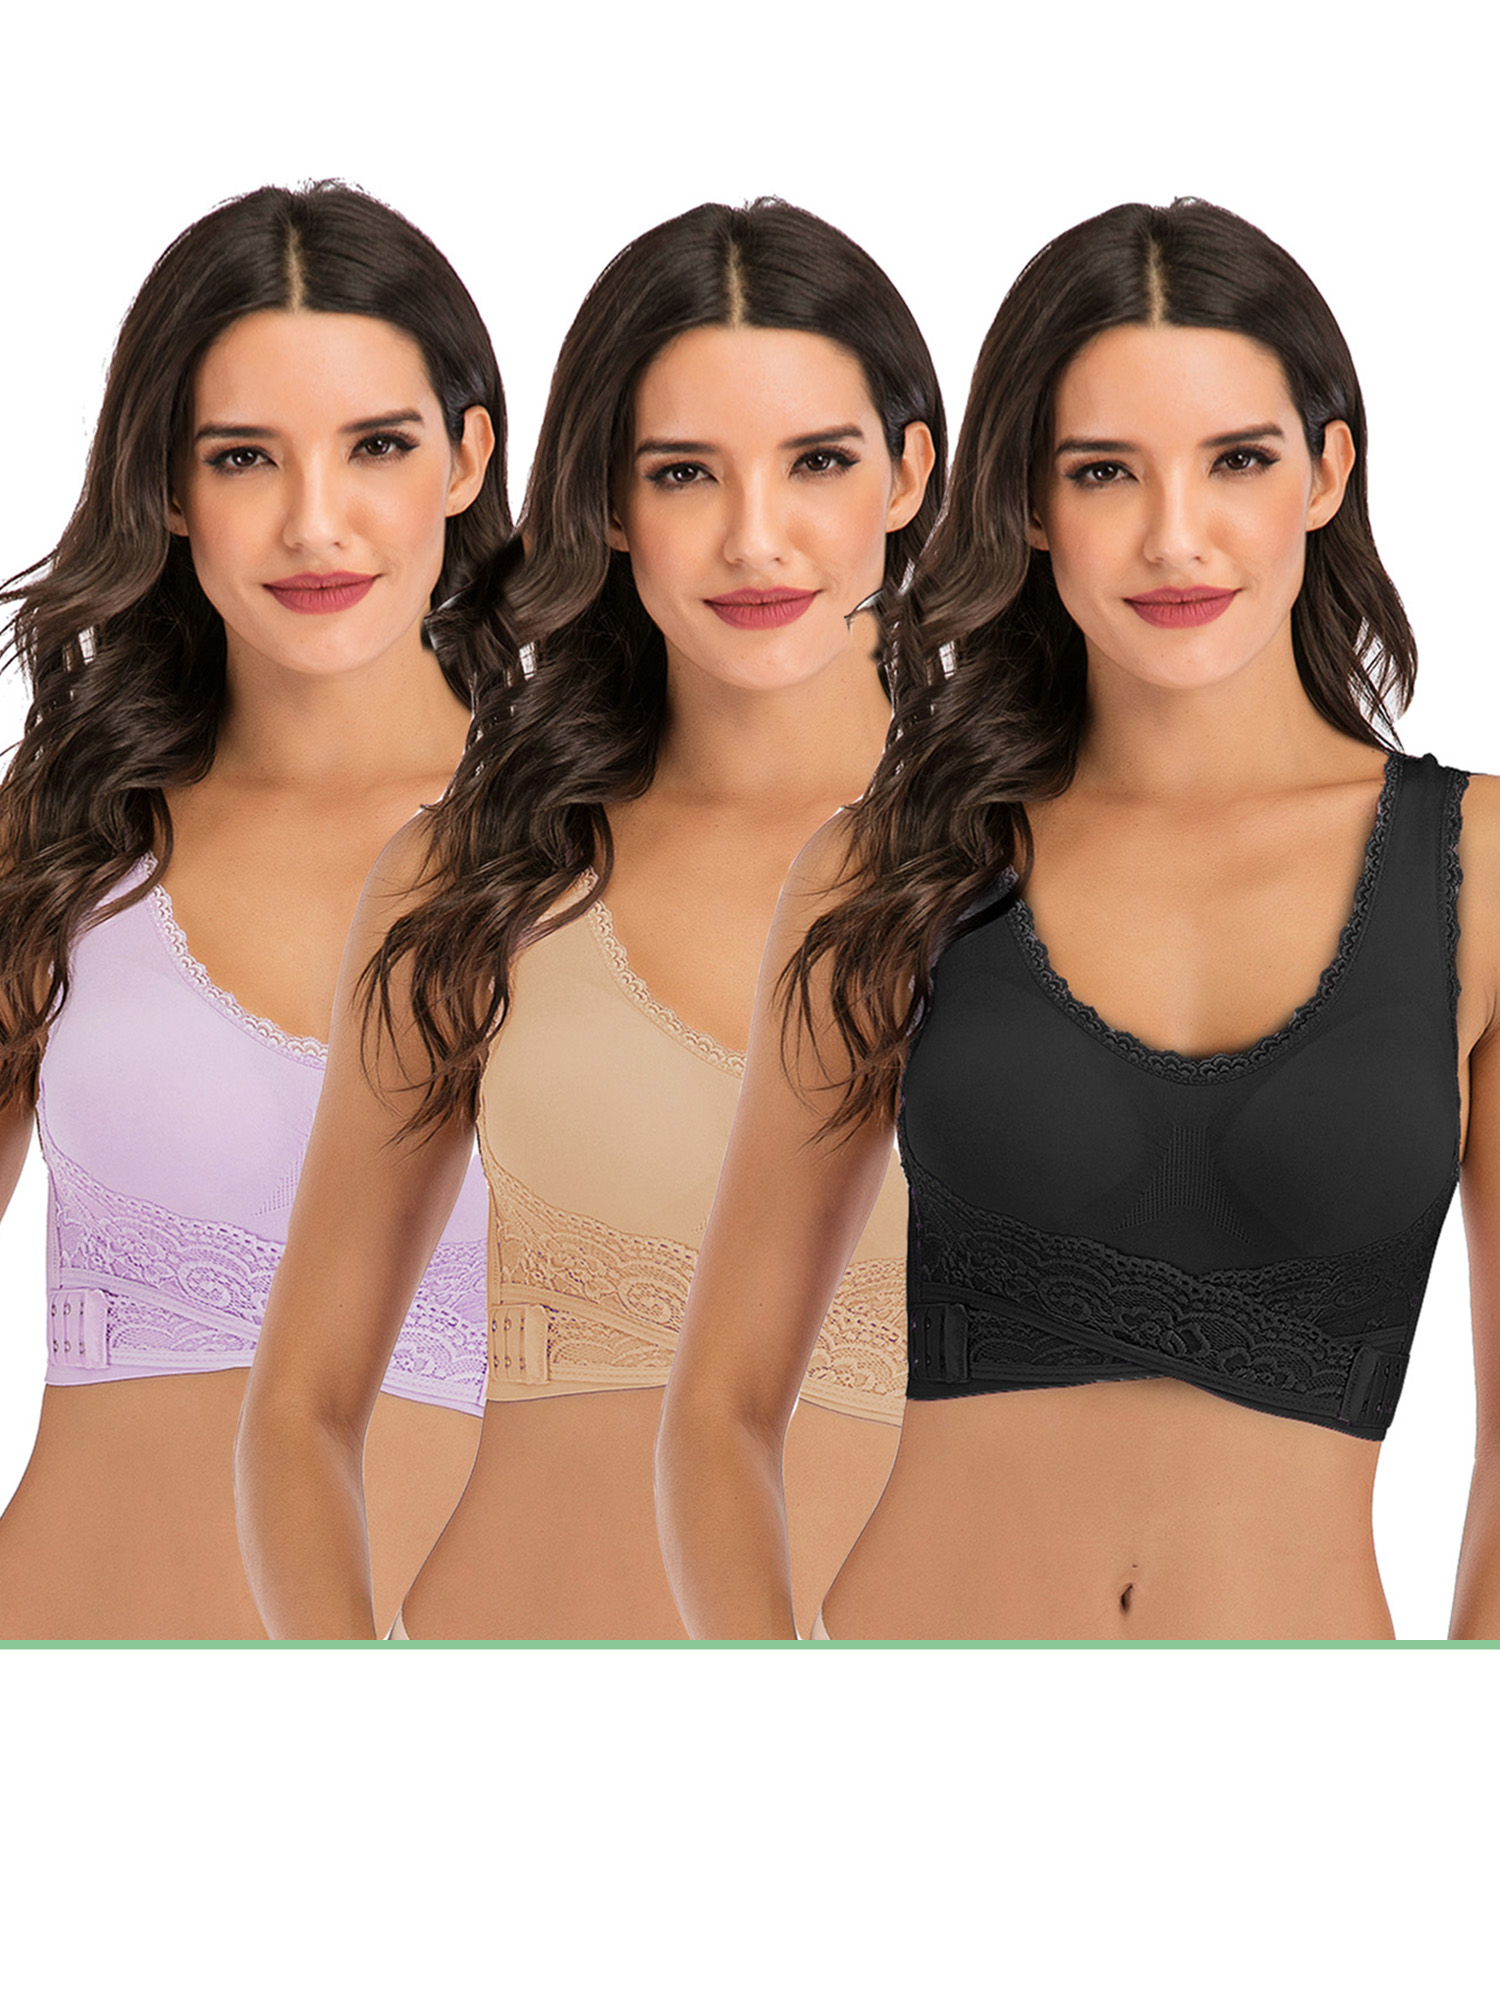 FUTATA Sports Bras For Women Padded Lace Front Buckle Lace Post Op Bras Seamless Yoga Bras Activewear Tops For Running Workout Gym,1/3 Pack - image 1 of 6